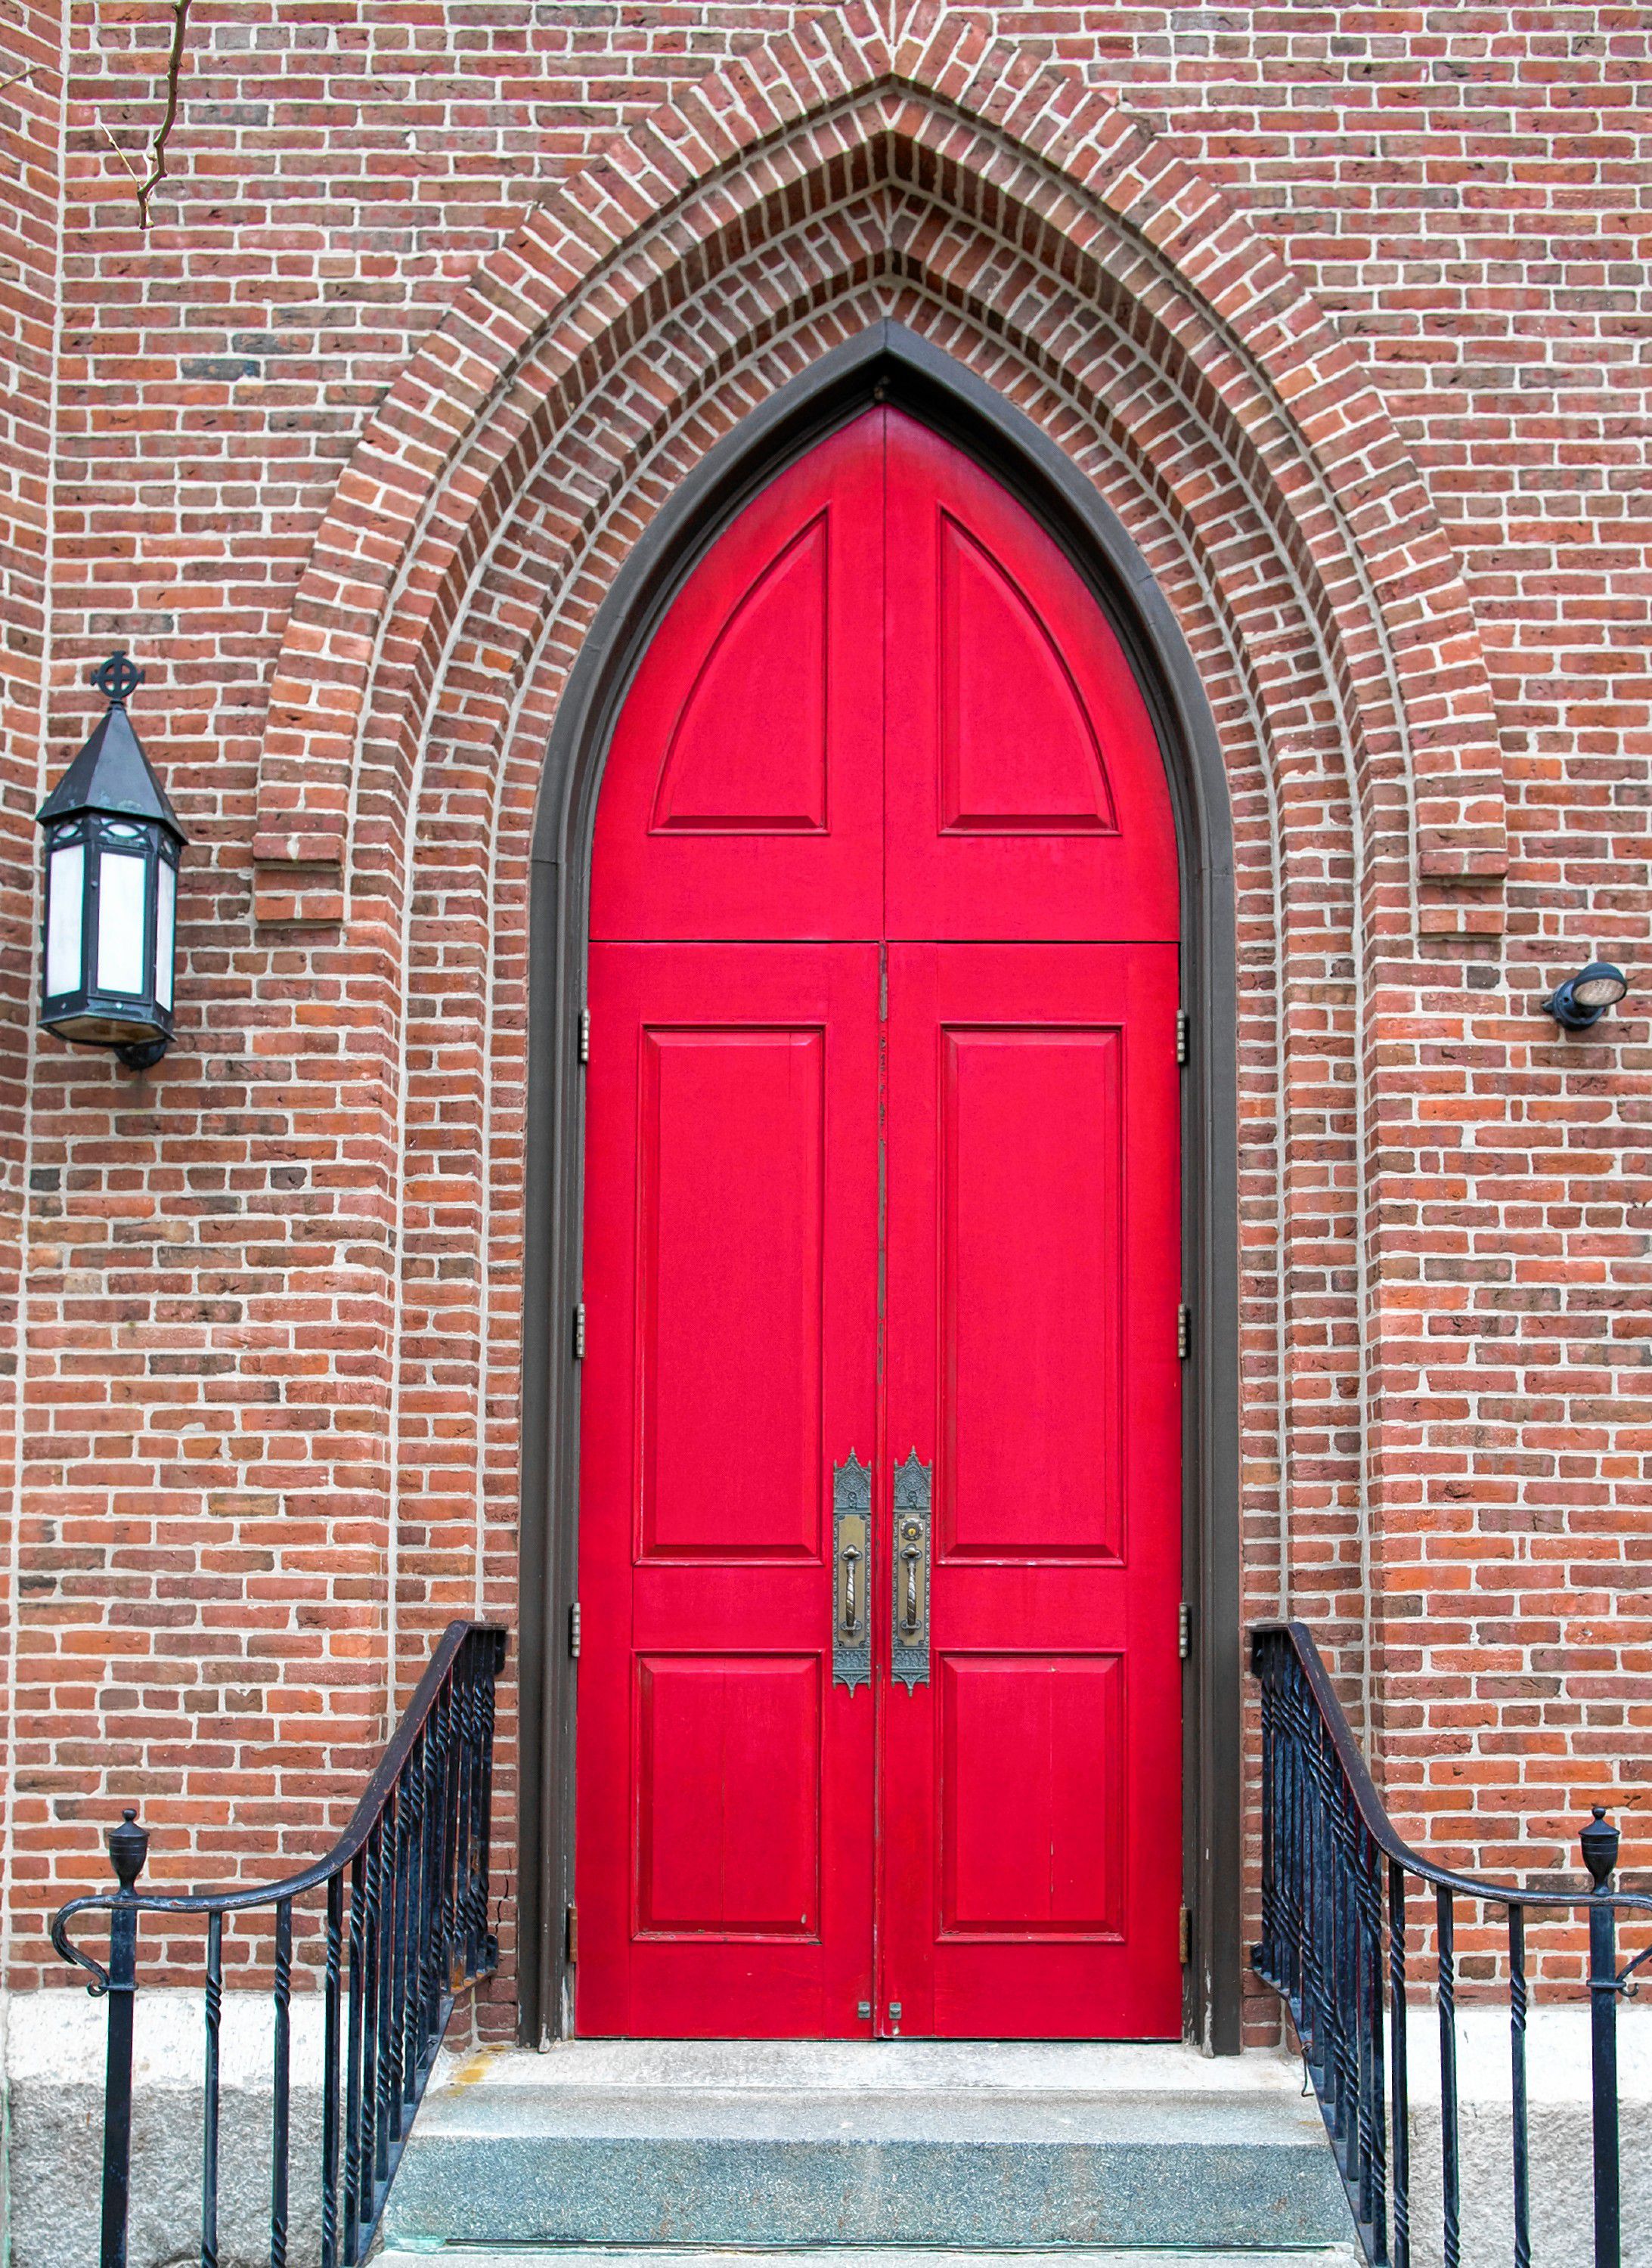 The red door entrance of St. Paul’s Episcopal Church in downtown Concord.